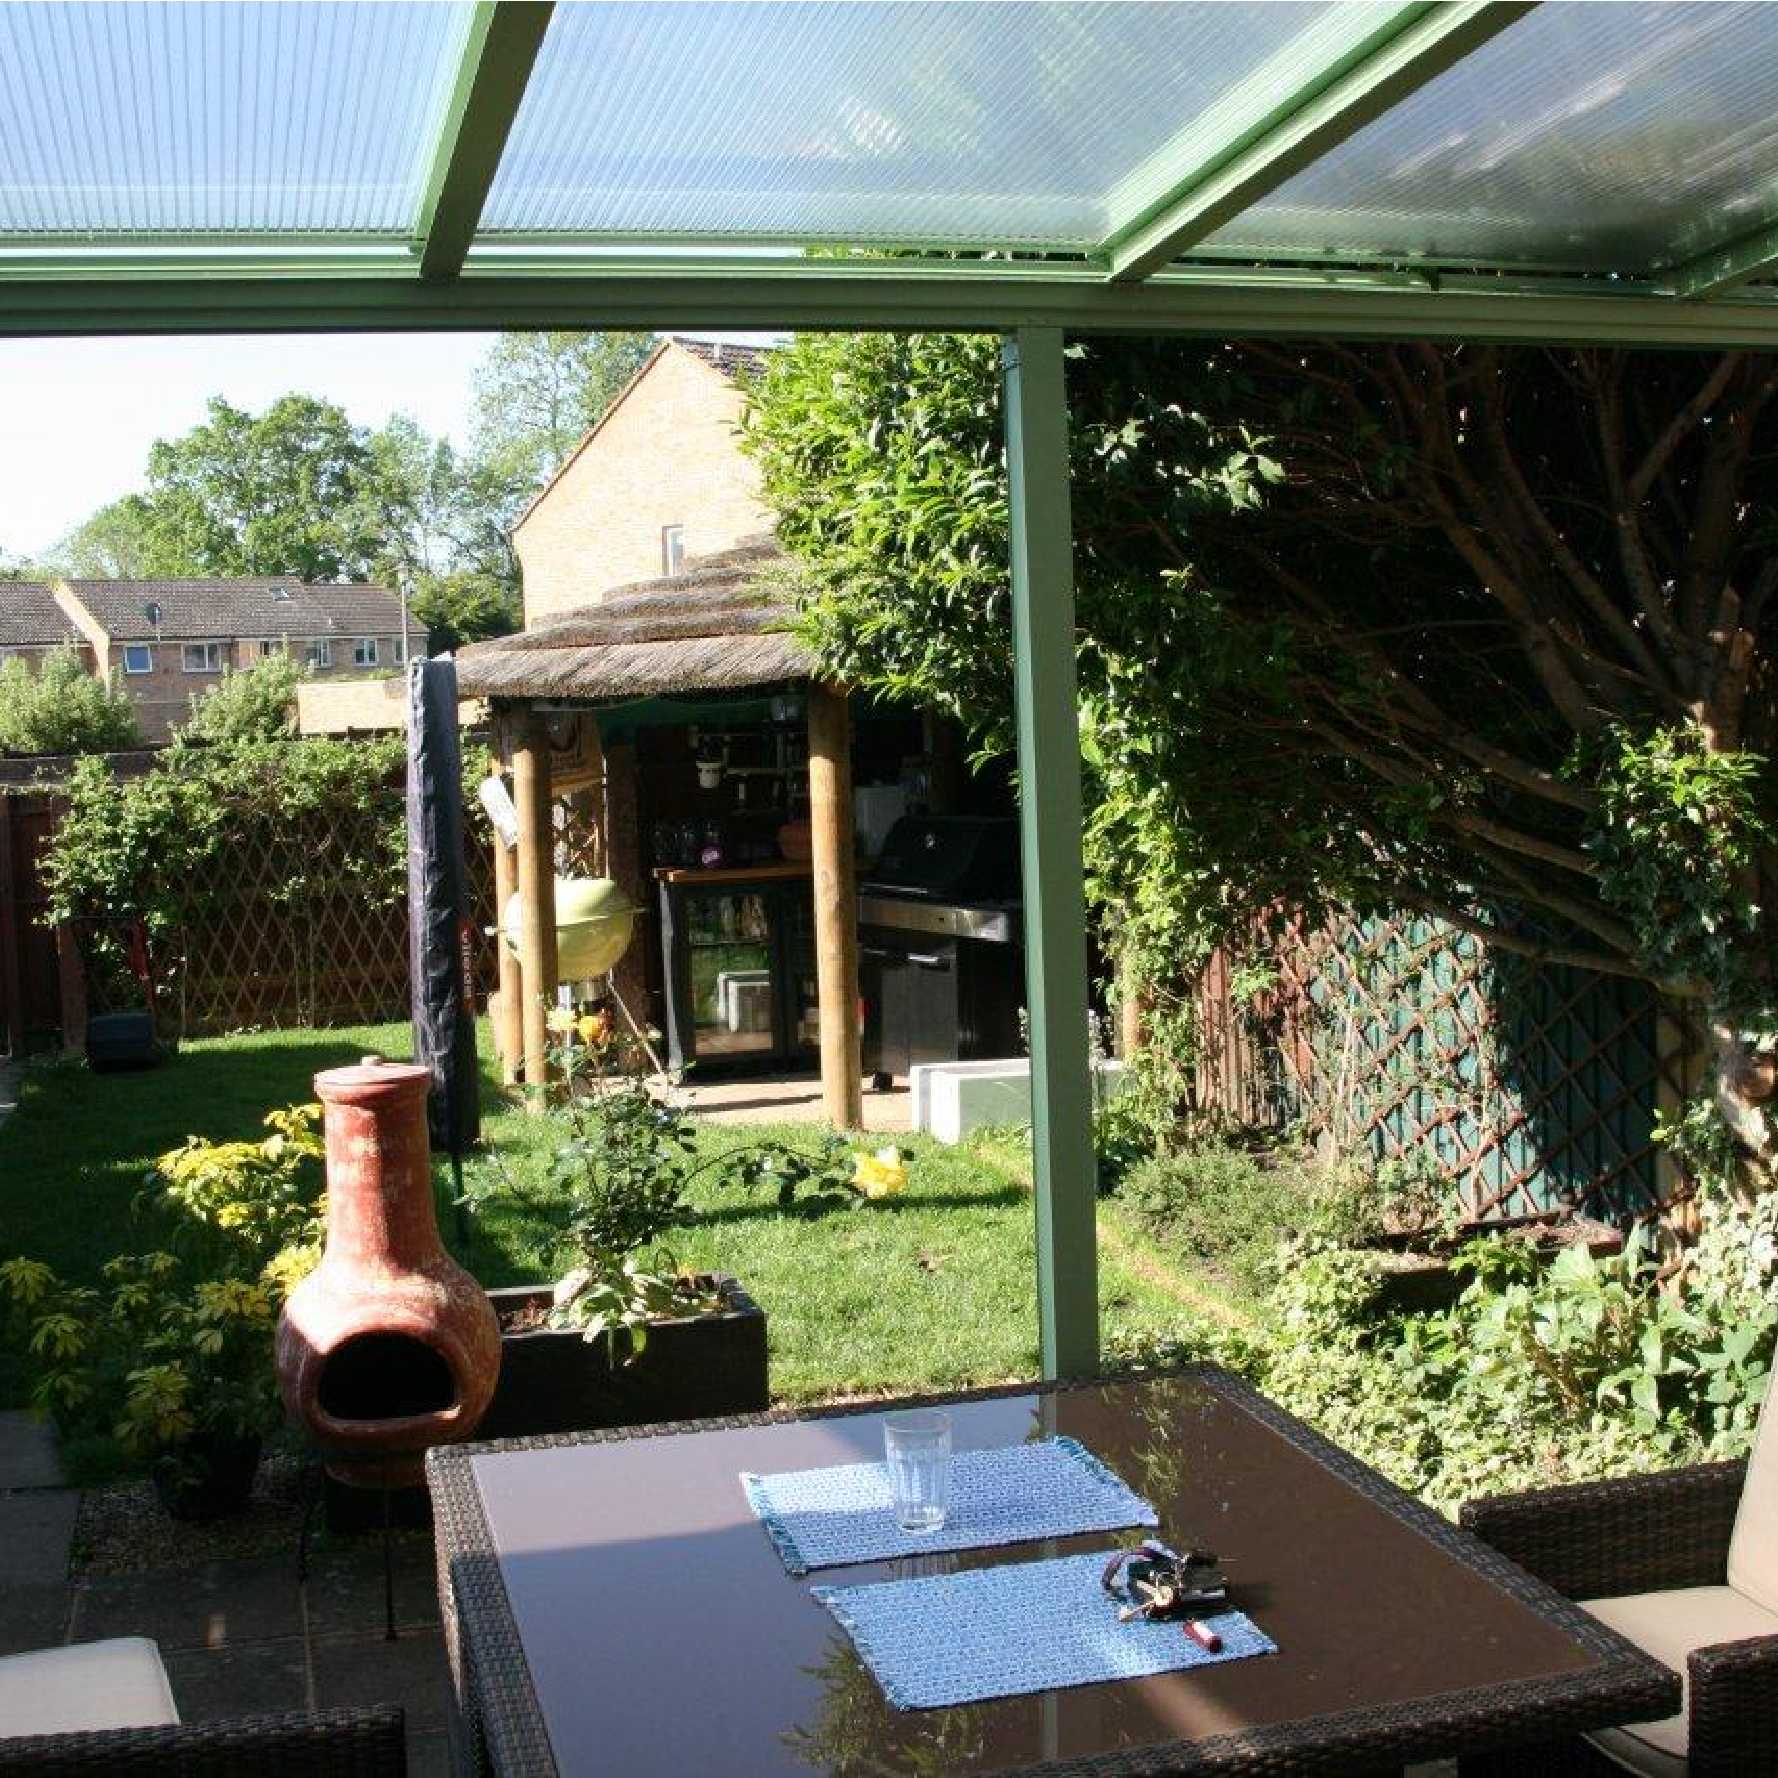 Affordable Omega Smart Lean-To Canopy, White with 16mm Polycarbonate Glazing - 11.8m (W) x 4.5m (P), (5) Supporting Posts